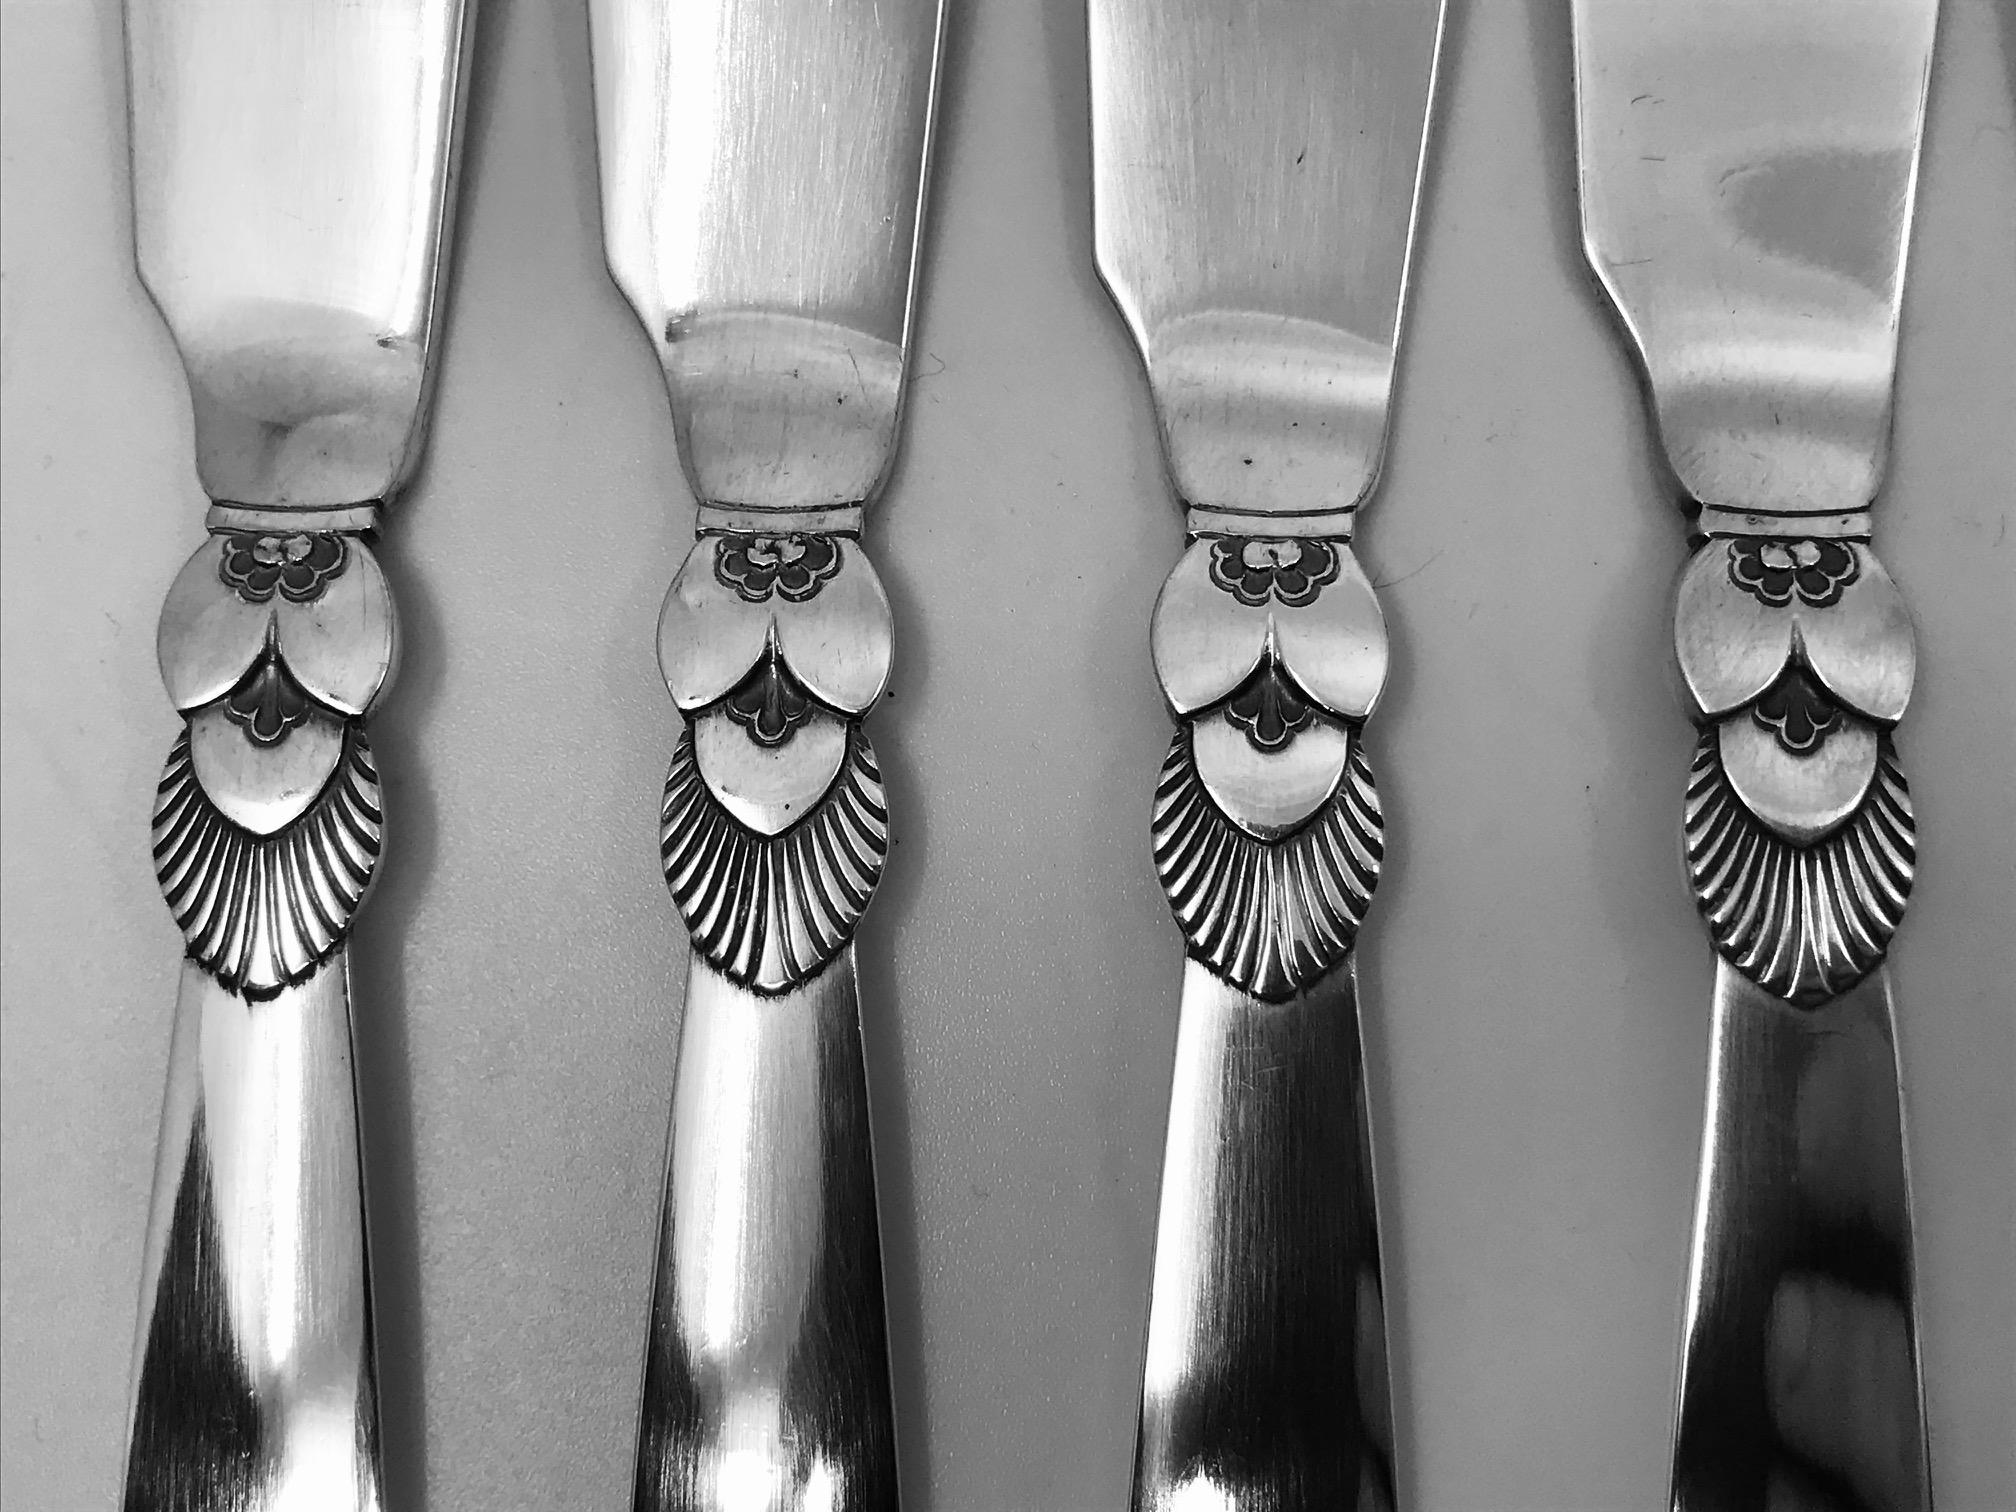 This is a set of 12 sterling silver Georg Jensen fish knives in the cactus pattern, design #30 by Gundorph Albertus from 1930.

Each measures 7 5/8? (19.4cm) in length.

All 12 marked with matching vintage Georg Jensen hallmarks from 1933-1944.